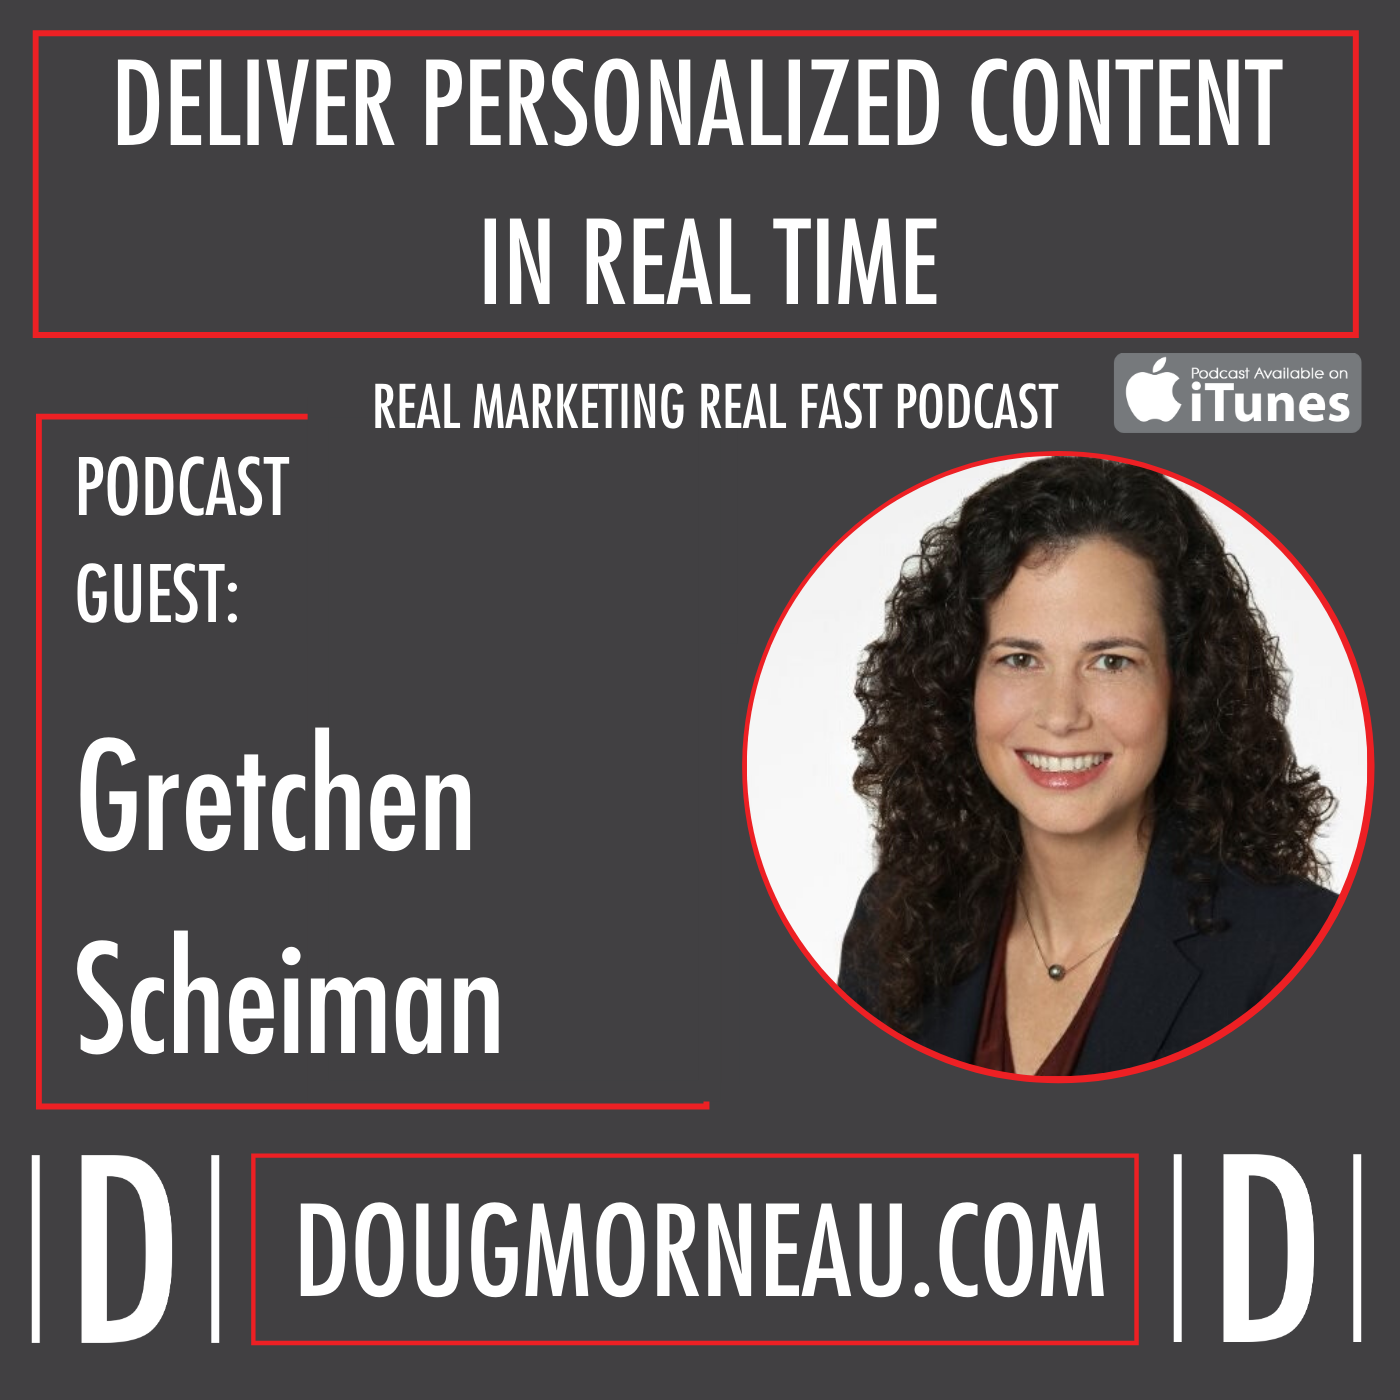 GRETCHEN SCHEIMAN - DELIVER PERSONALIZED CONTENT IN REAL TIME - DOUG MORNEAU - REAL MARKETING REAL FAST PODCAST